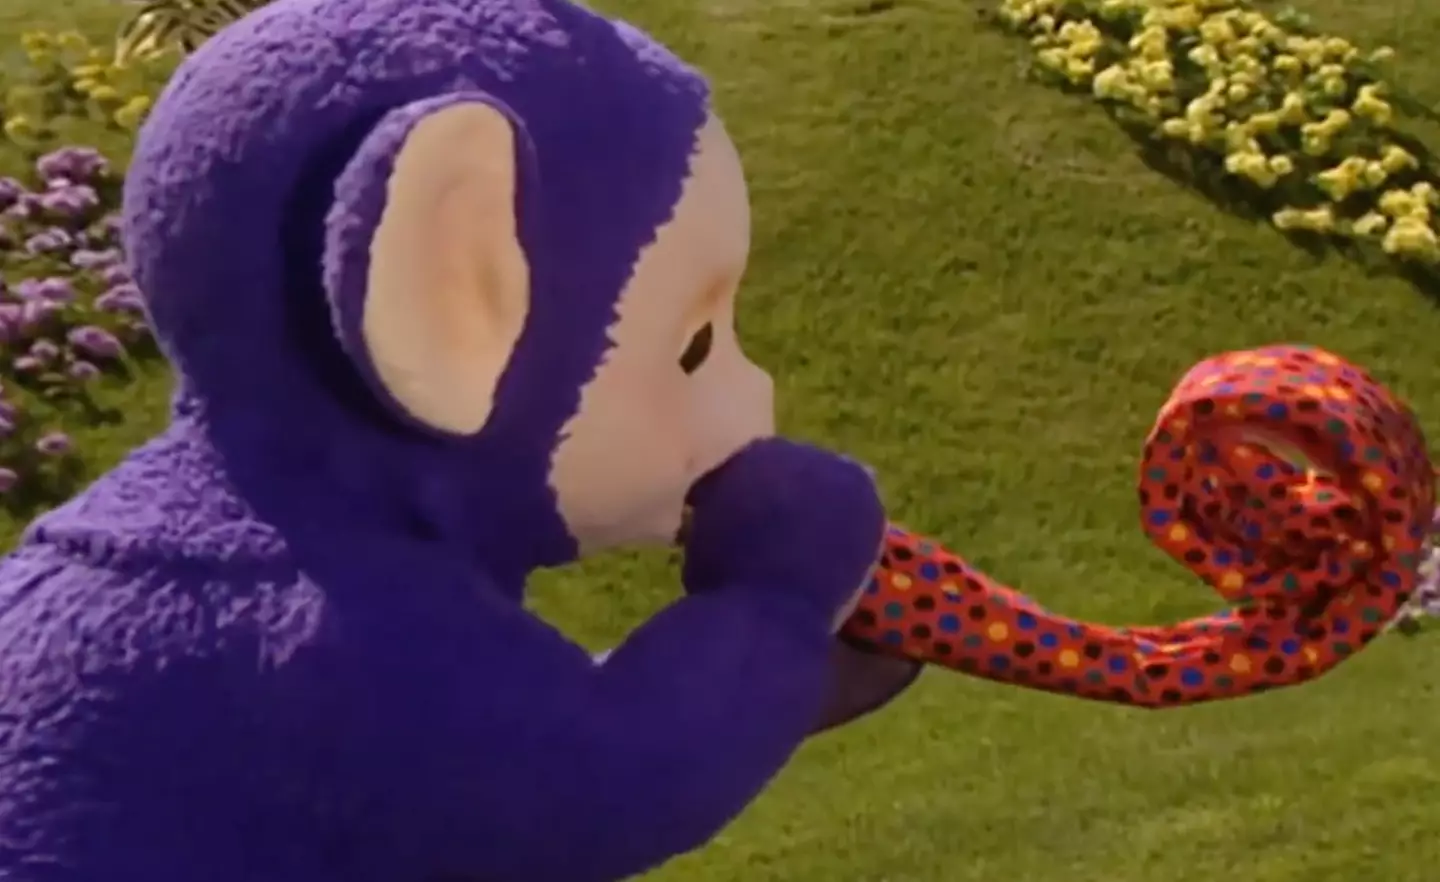 Tinky-Winky got his hands on a giant party blower.